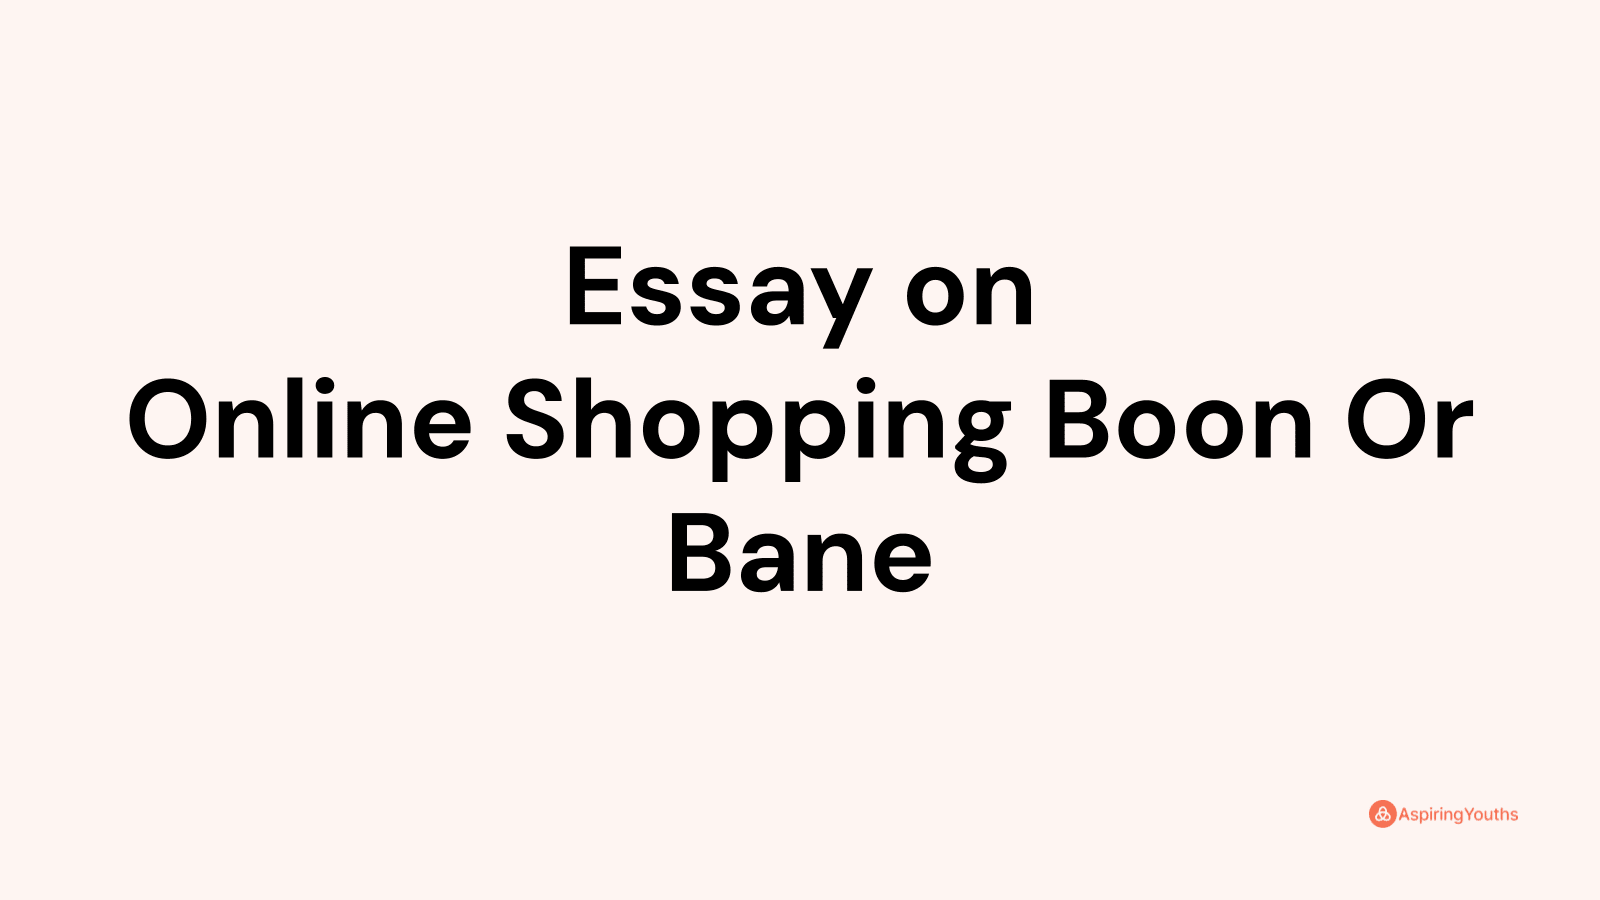 online shopping is a boon essay 300 words